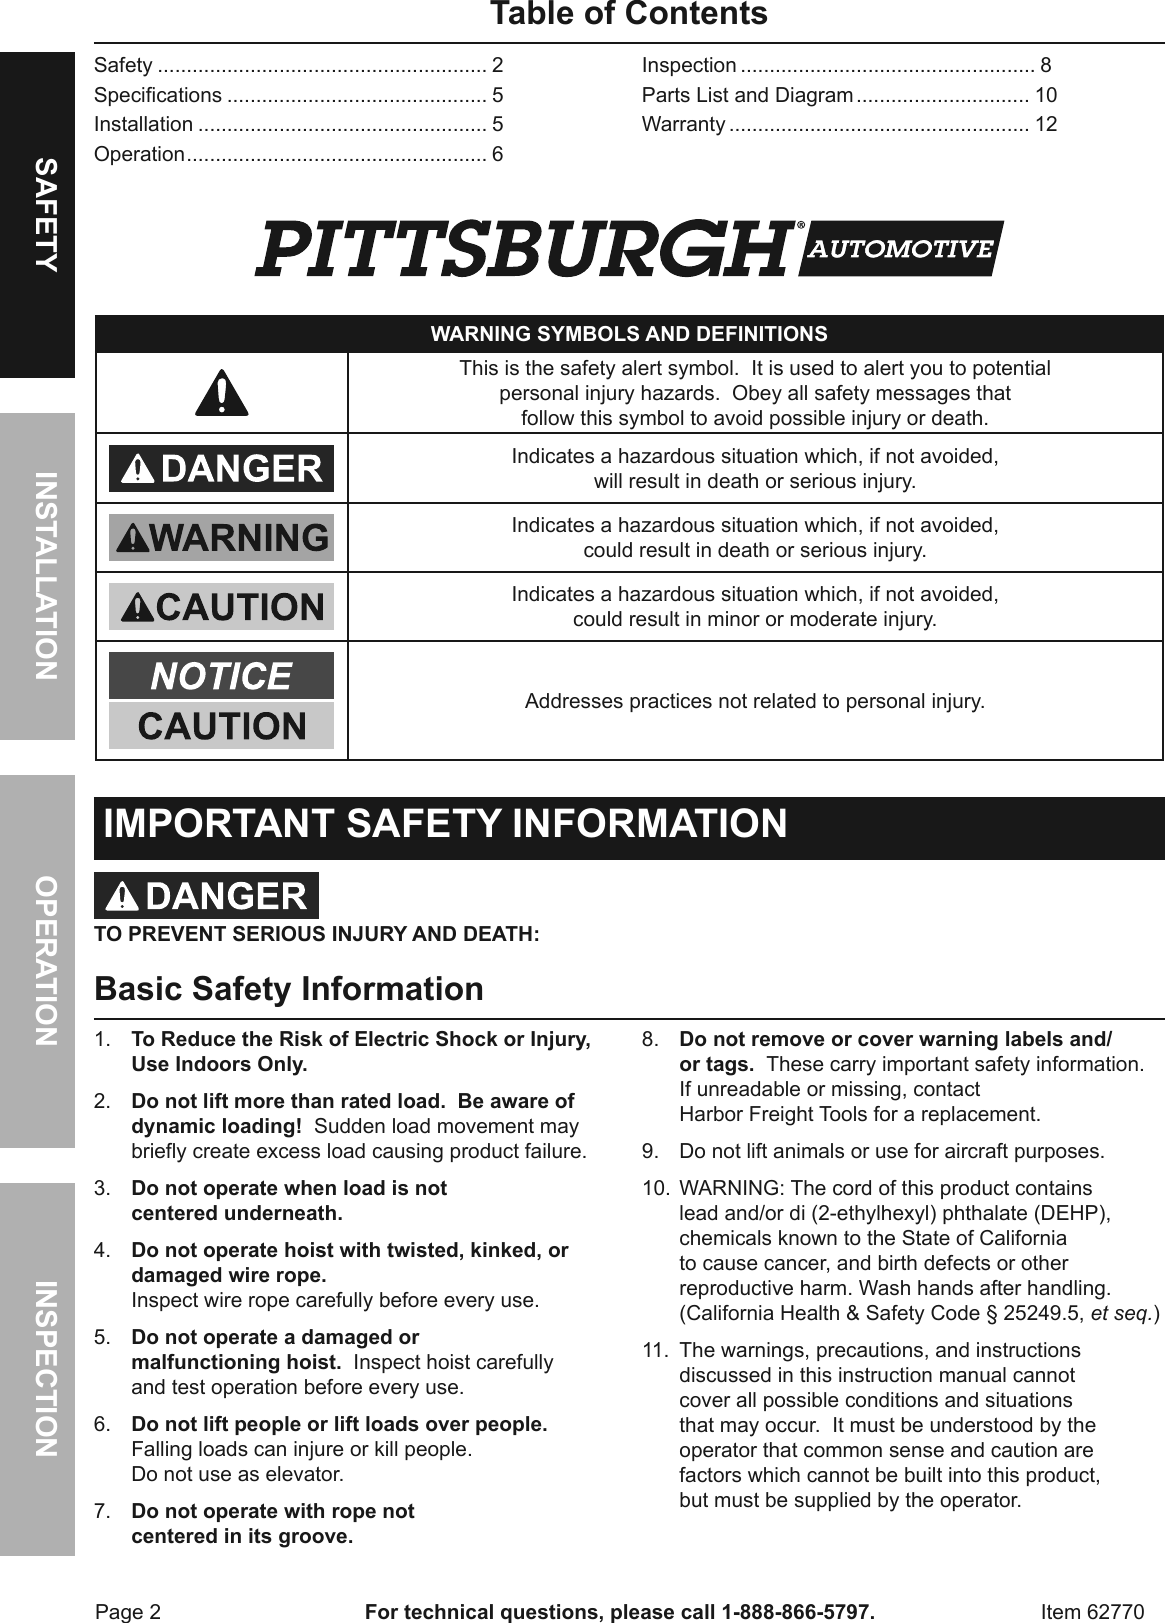 Page 2 of 12 - Manual For The 62770 2000 Lb. Electric Hoist With Remote Control